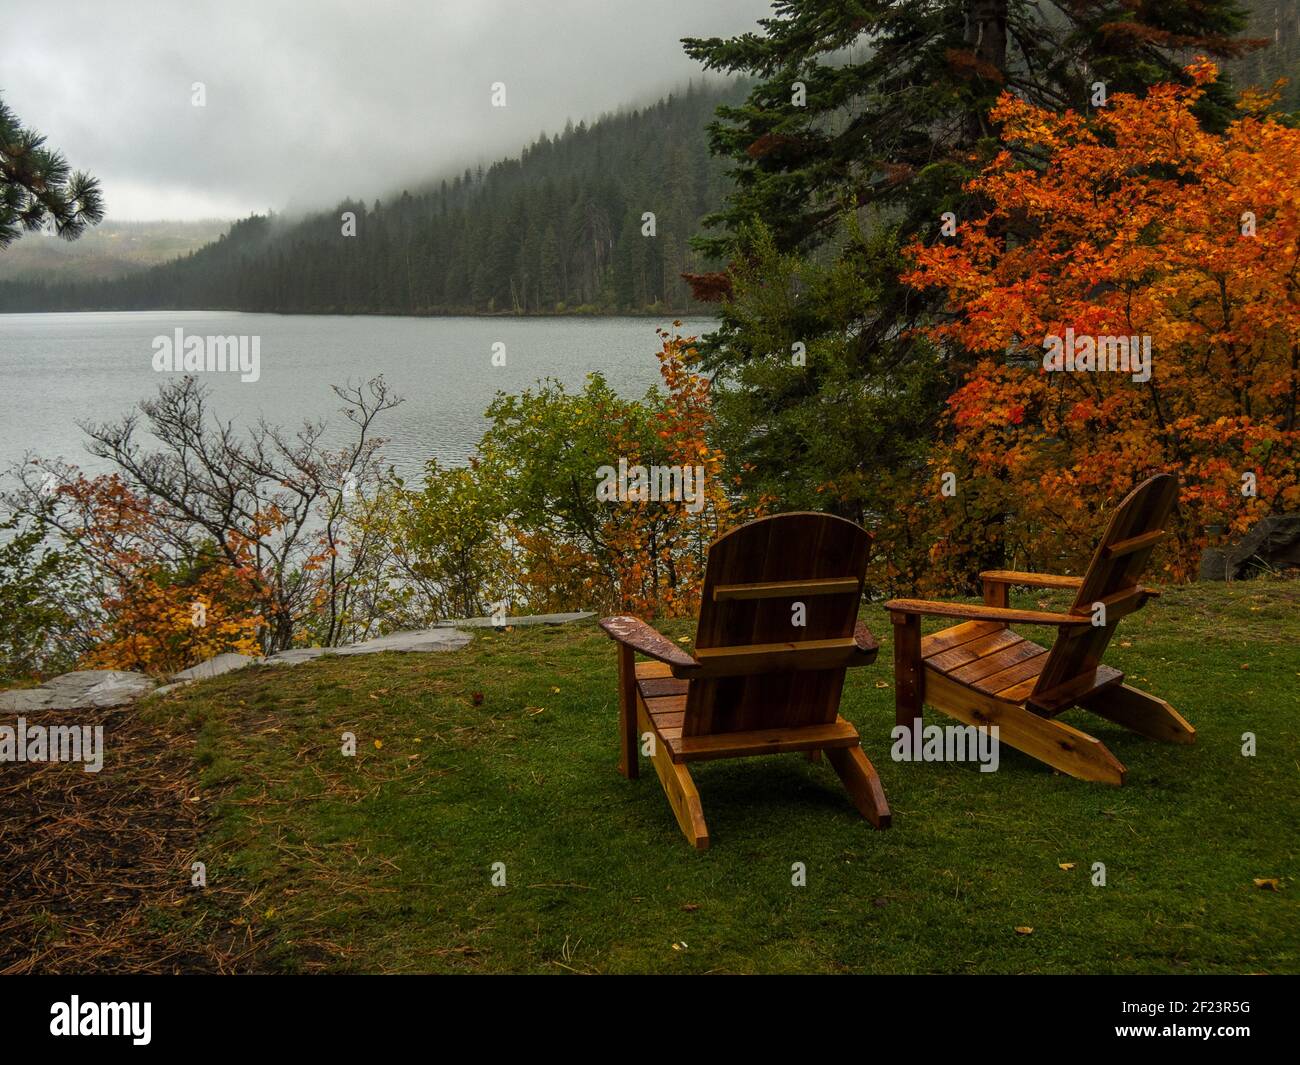 Summer's end - fall season rainfall comes to Suttle Lake in central Oregon Stock Photo